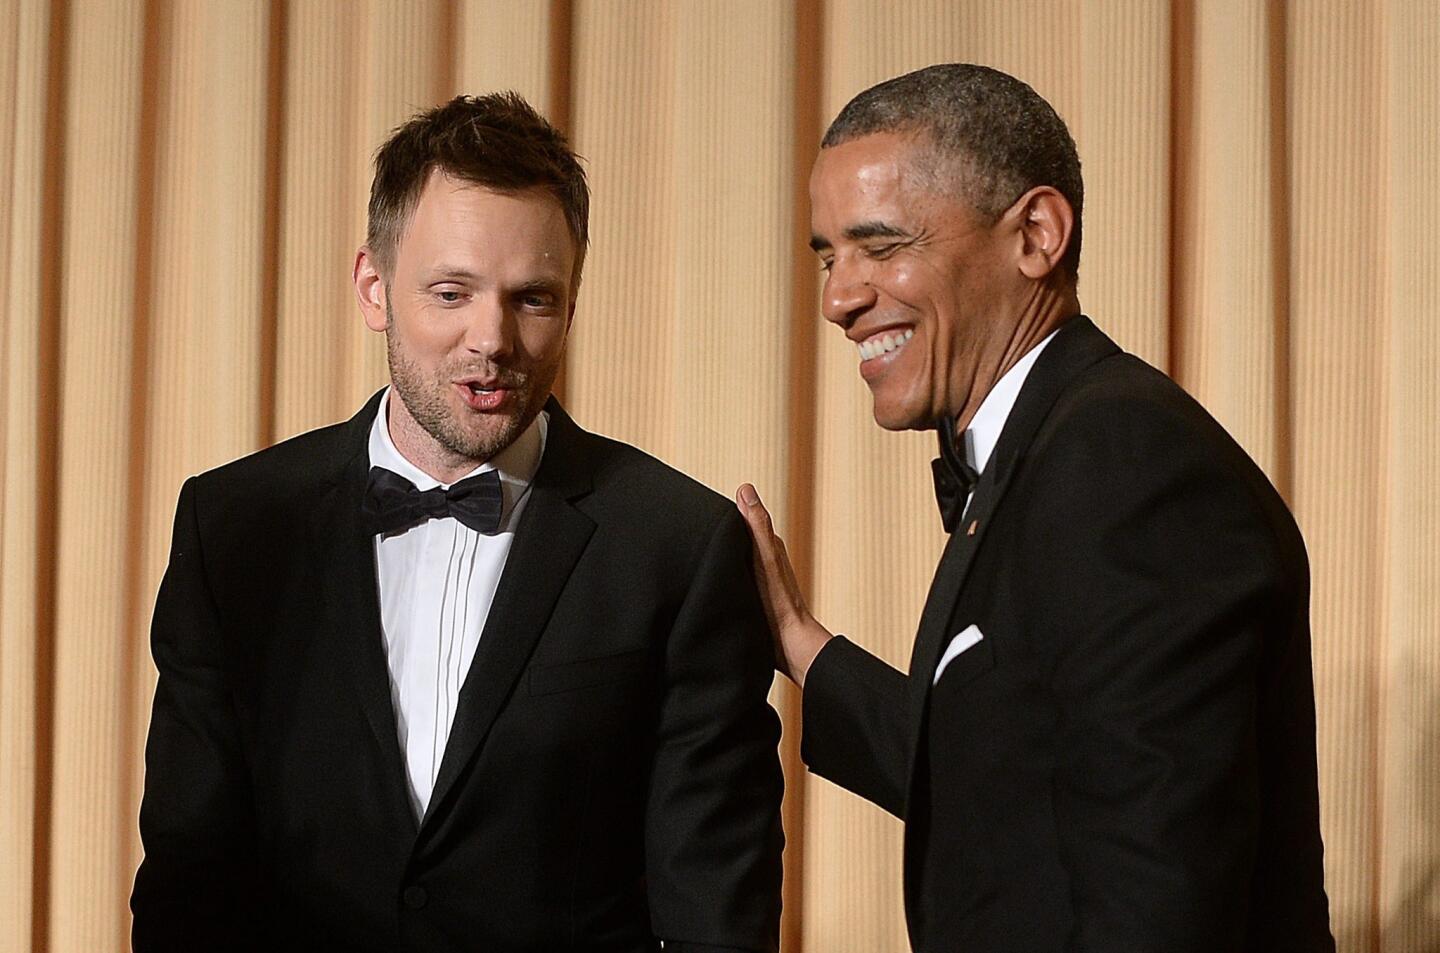 Comedian Joel McHale and President Obama have a laugh.